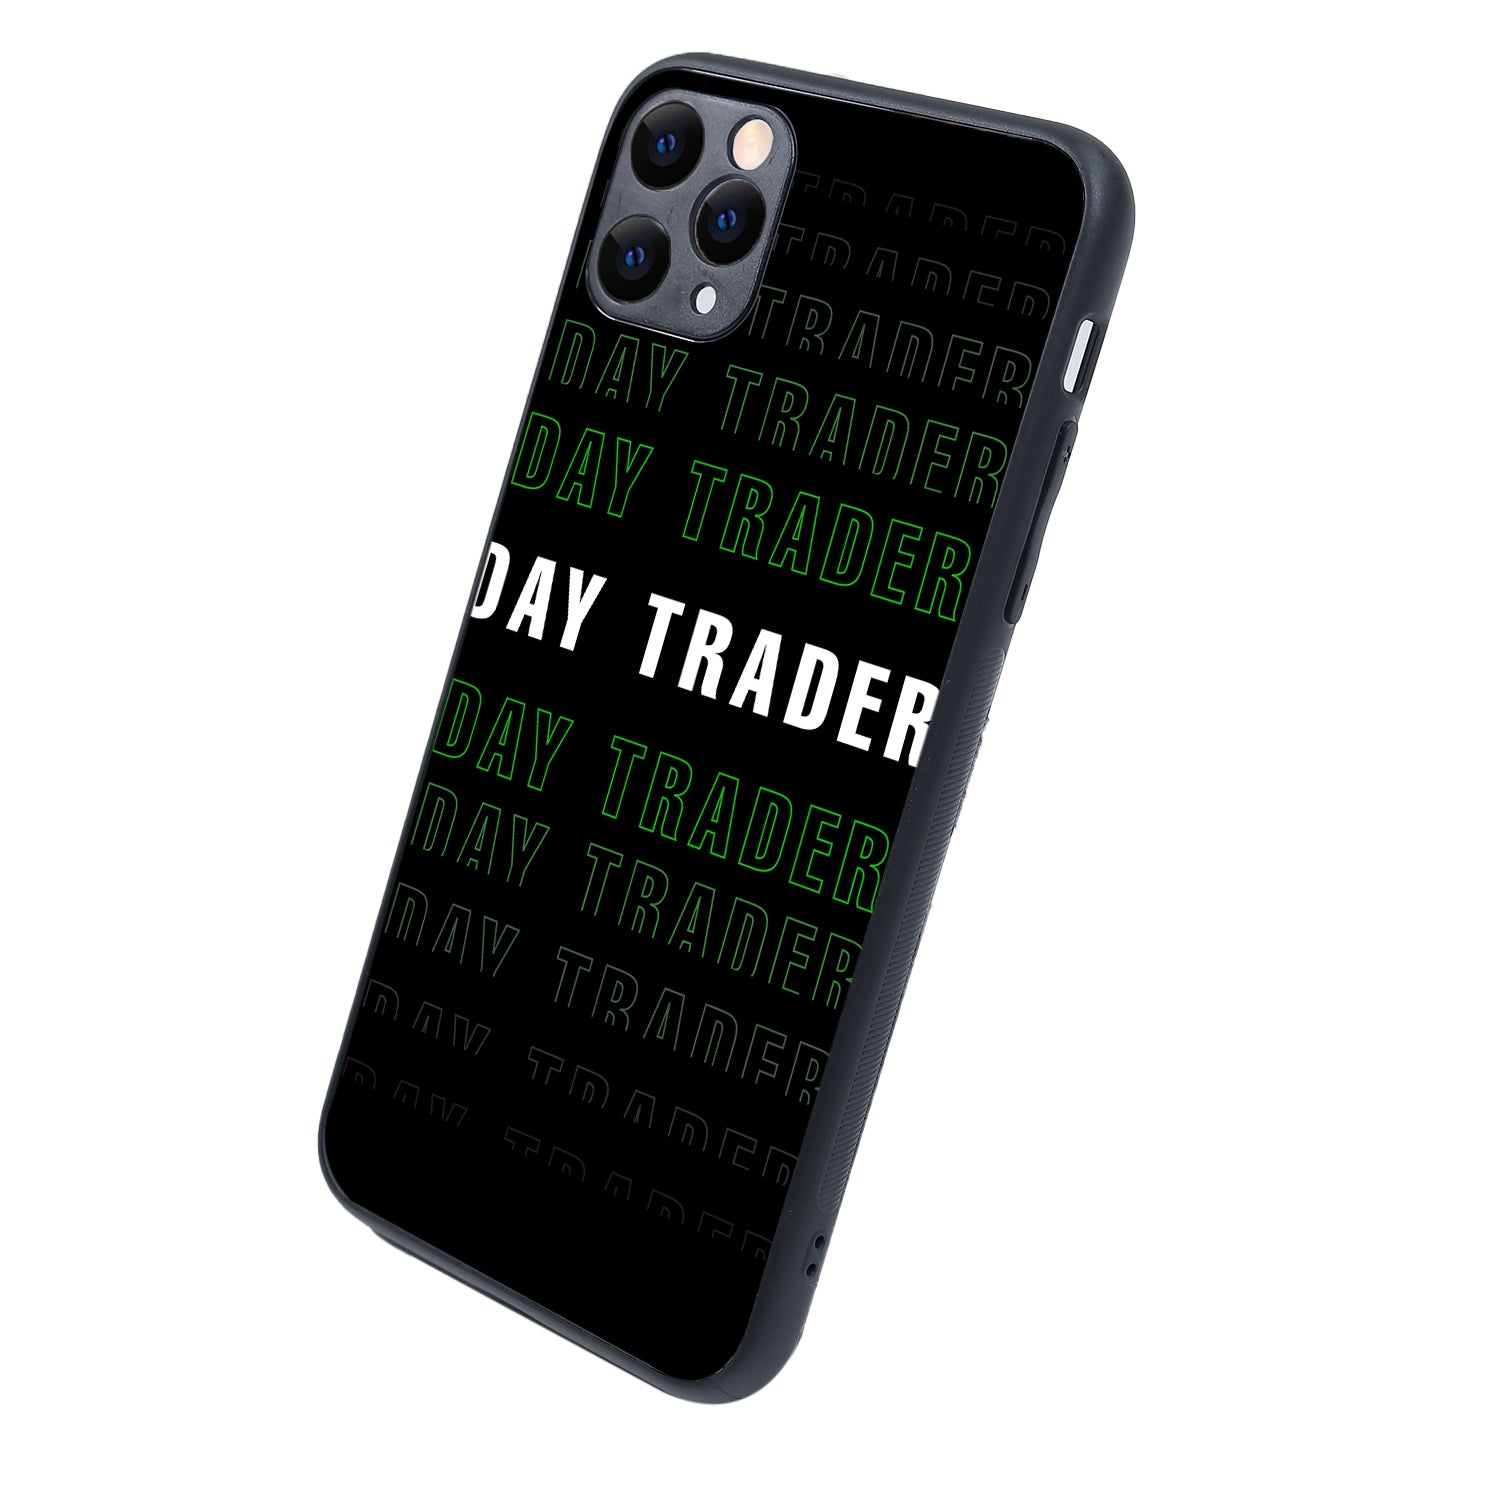 Day Trading iPhone 11 Pro Max Case